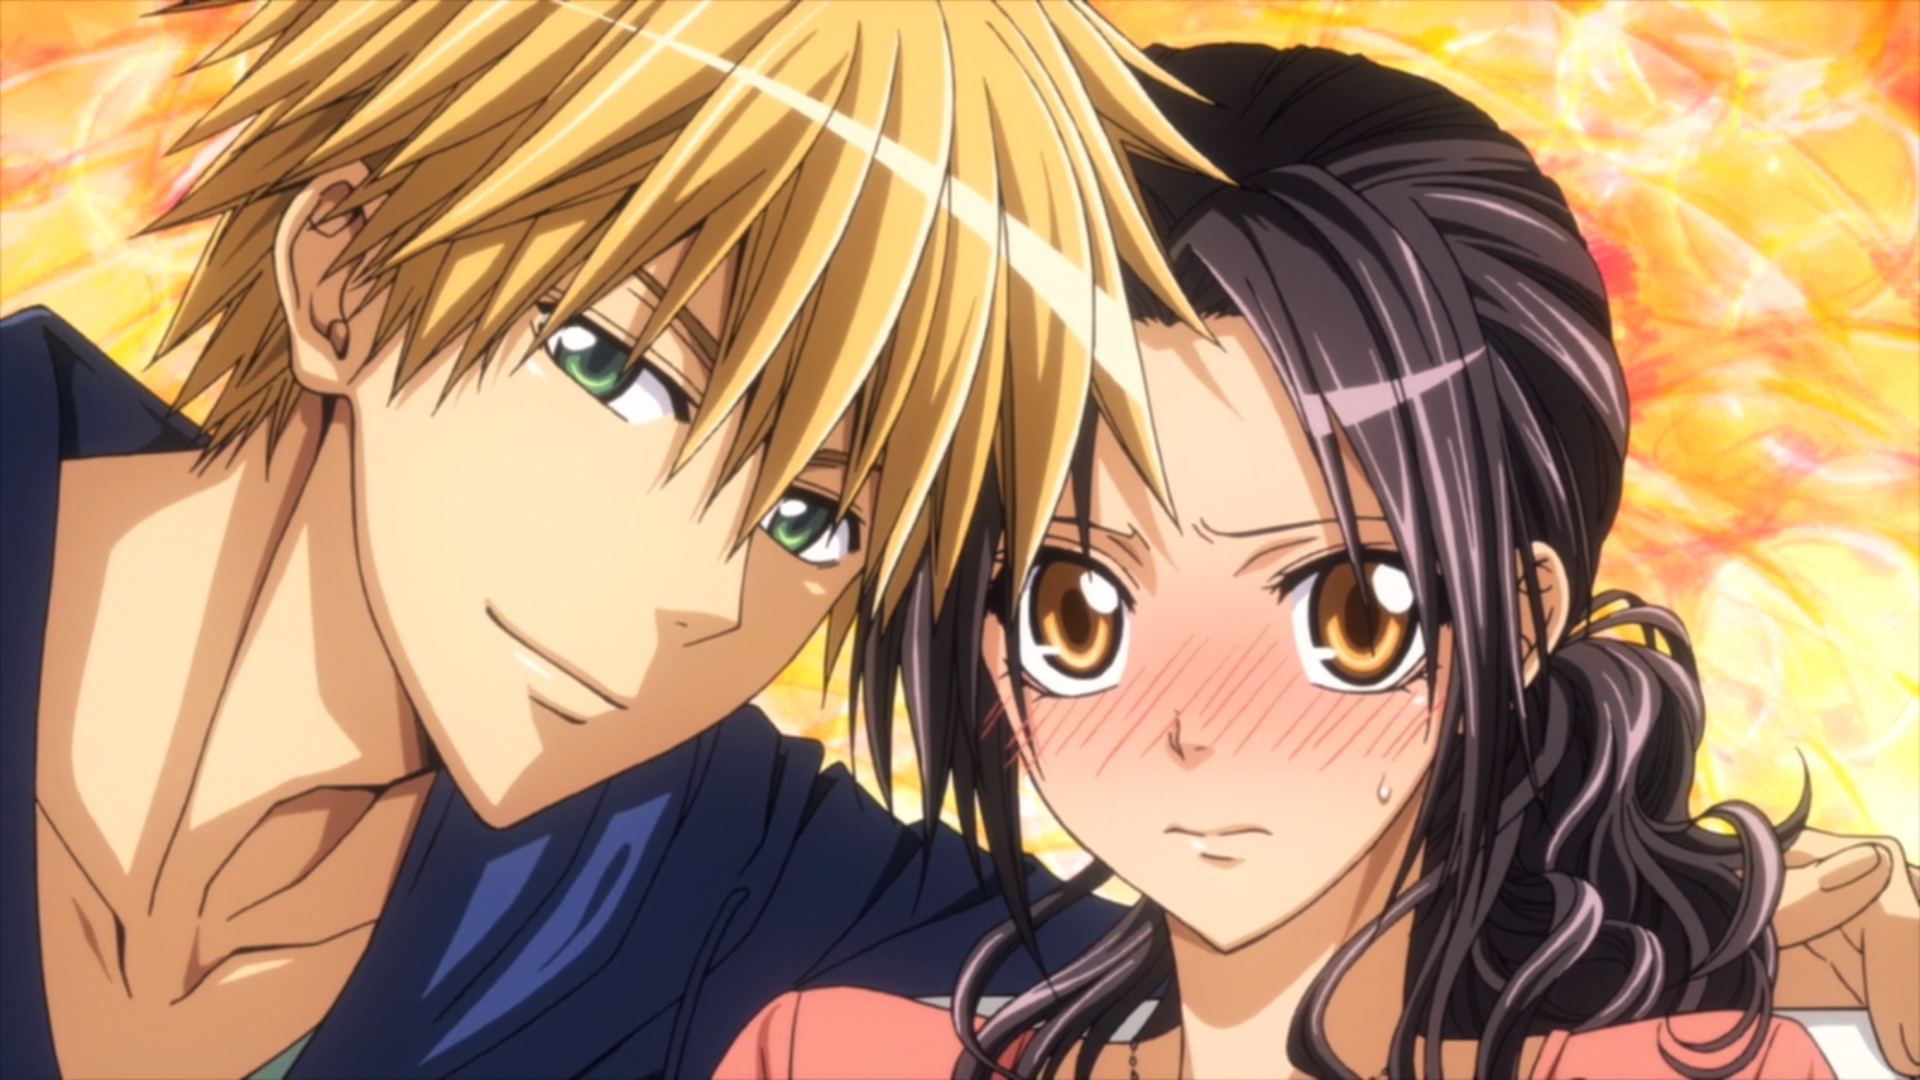 10. "Usui and Misaki from Maid Sama!" - wide 10